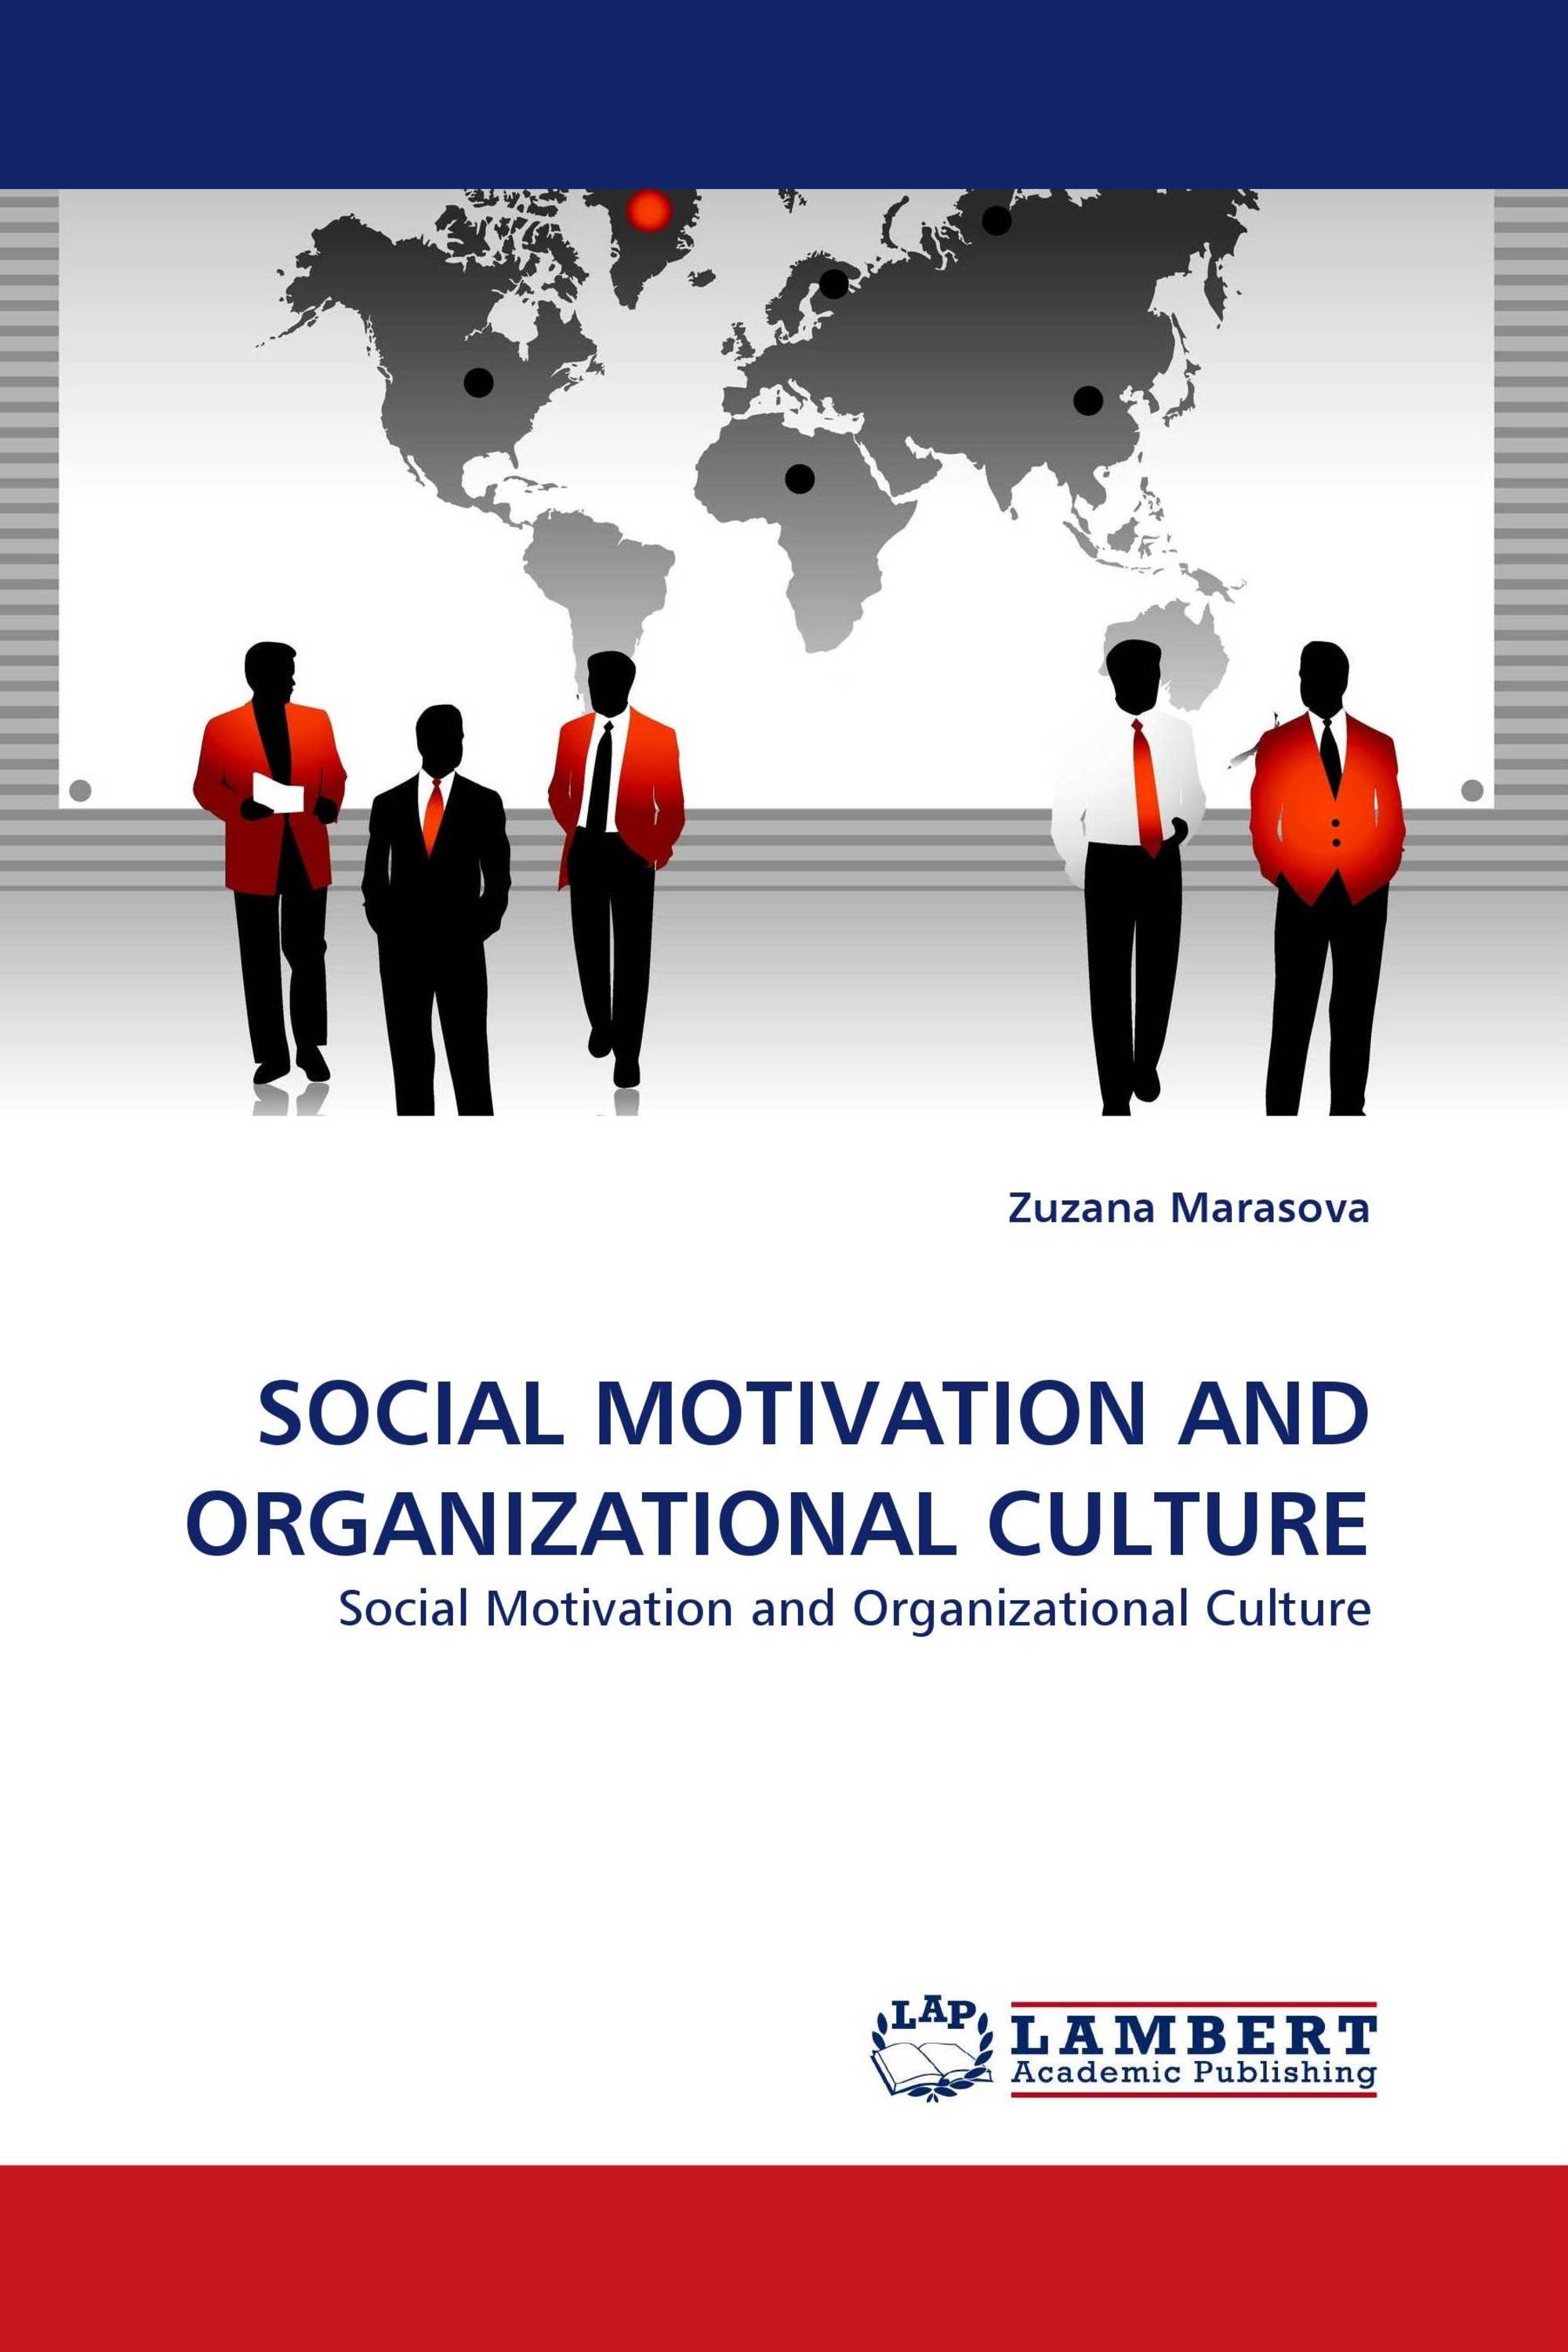 SOCIAL MOTIVATION AND ORGANIZATIONAL CULTURE